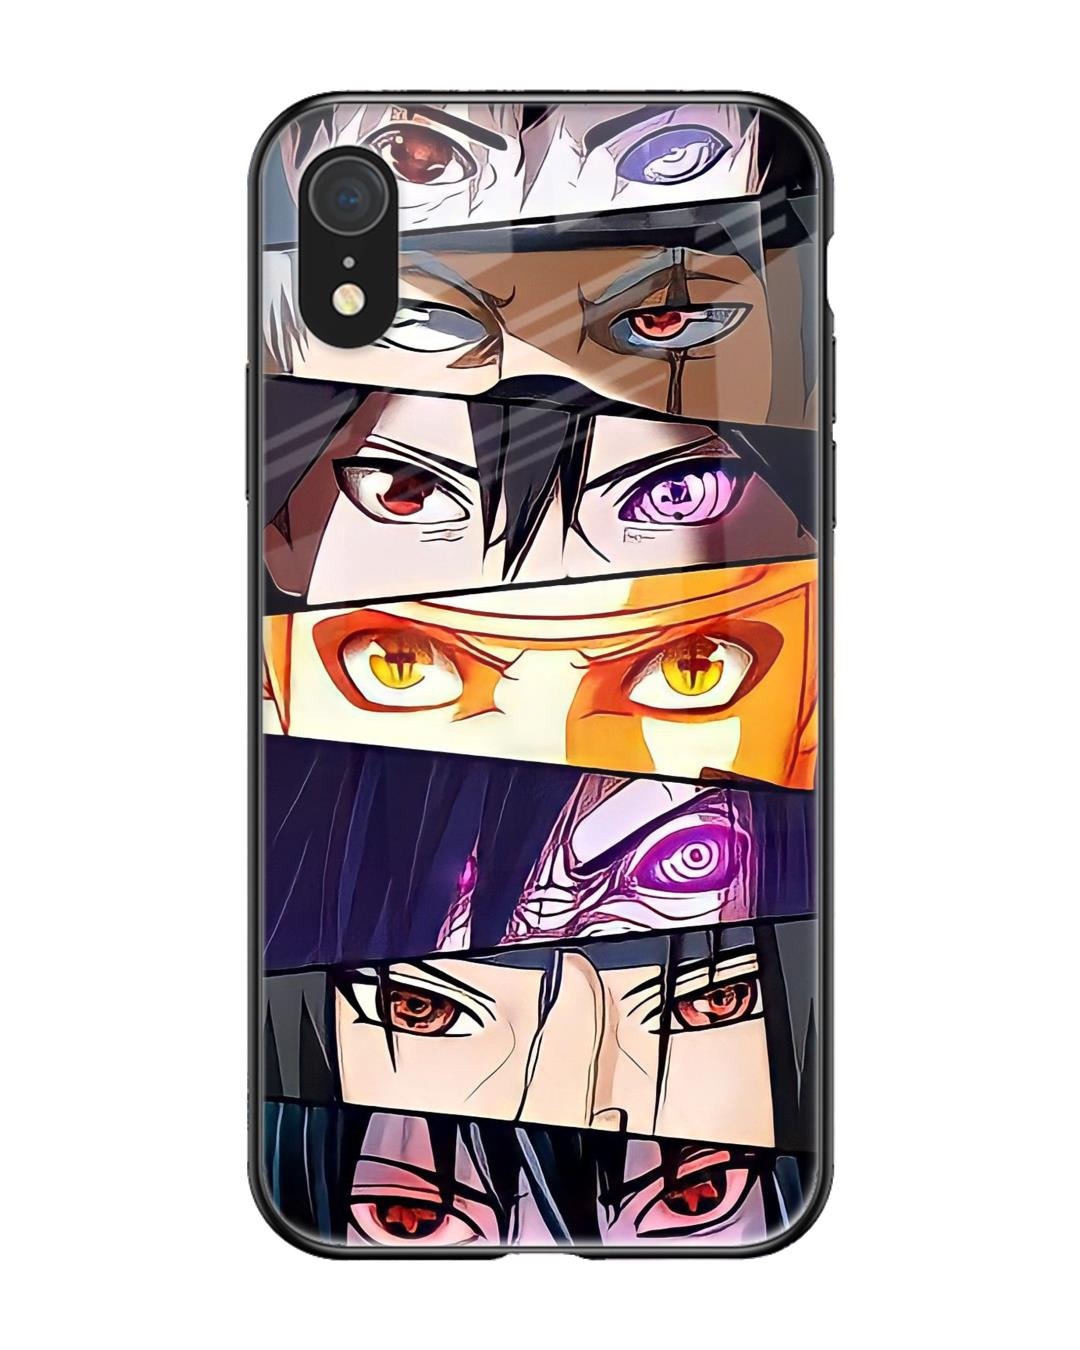 WrapCart Mobile Covers Transparent Mobile Covers and Mobile Skins combo at  best rates Customised Mobile Cases India  WrapCart Skins